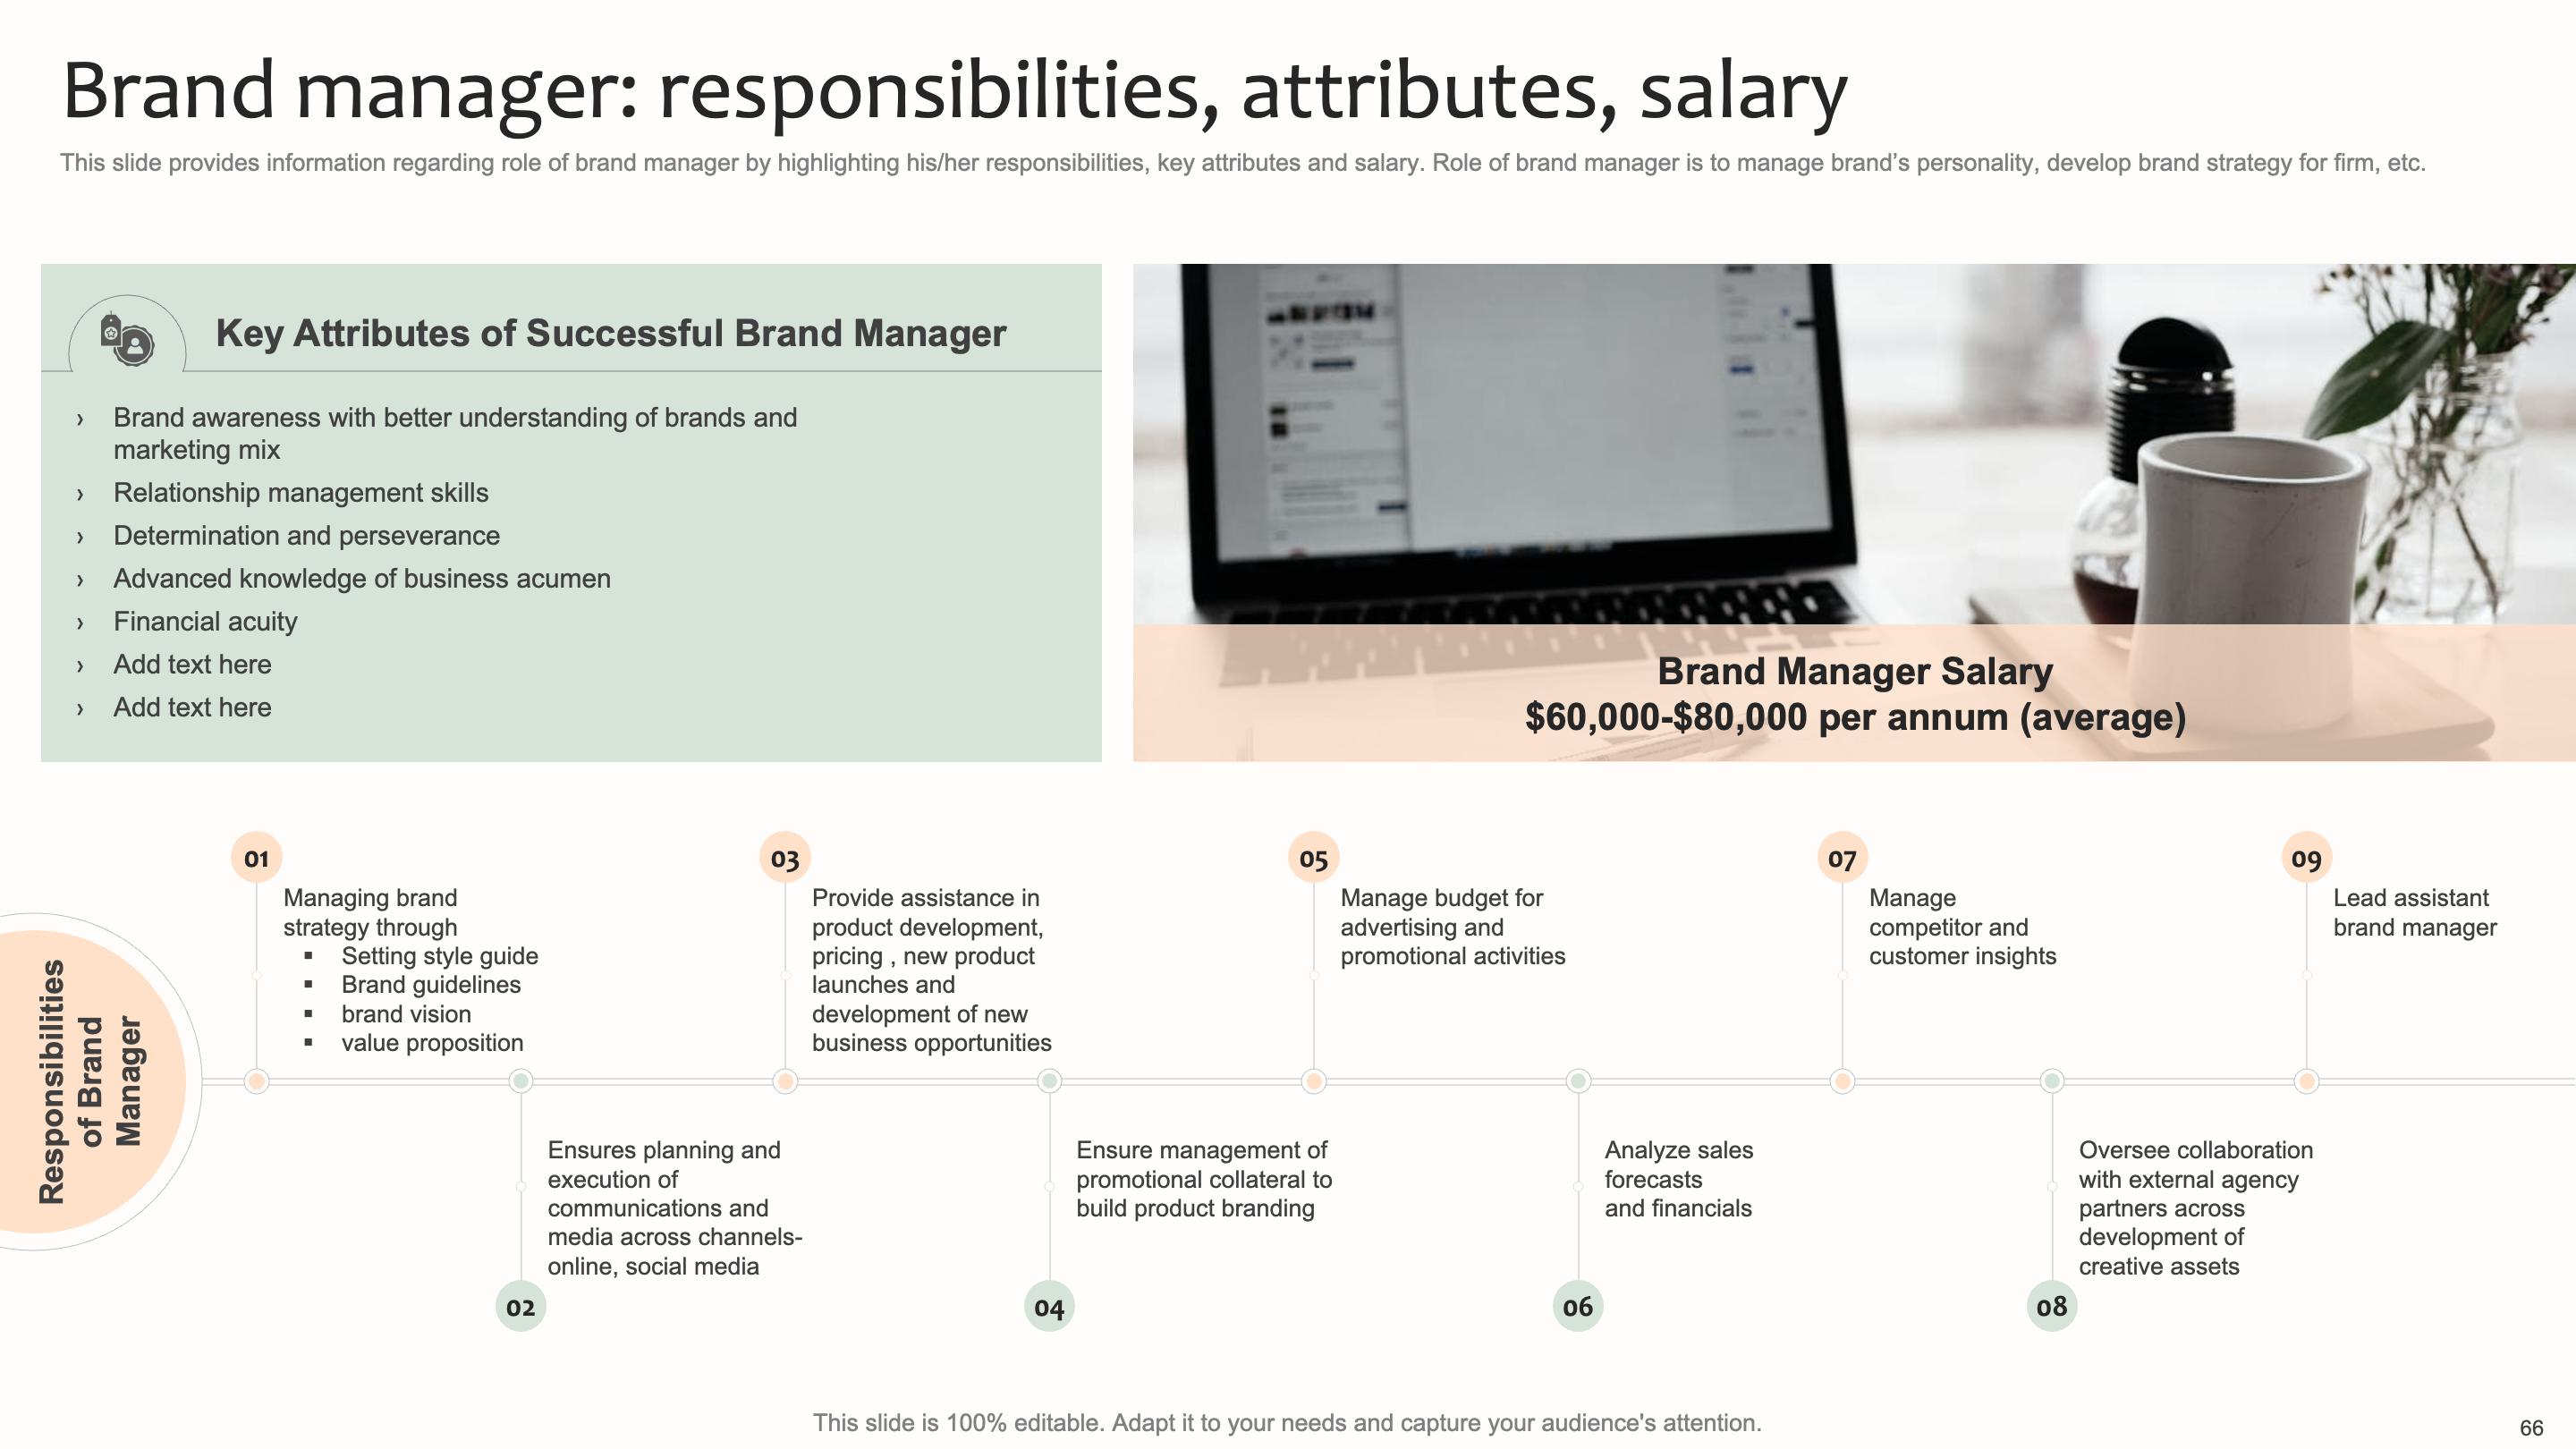 Brand Manager: Responsibilities, Salary, Attributes